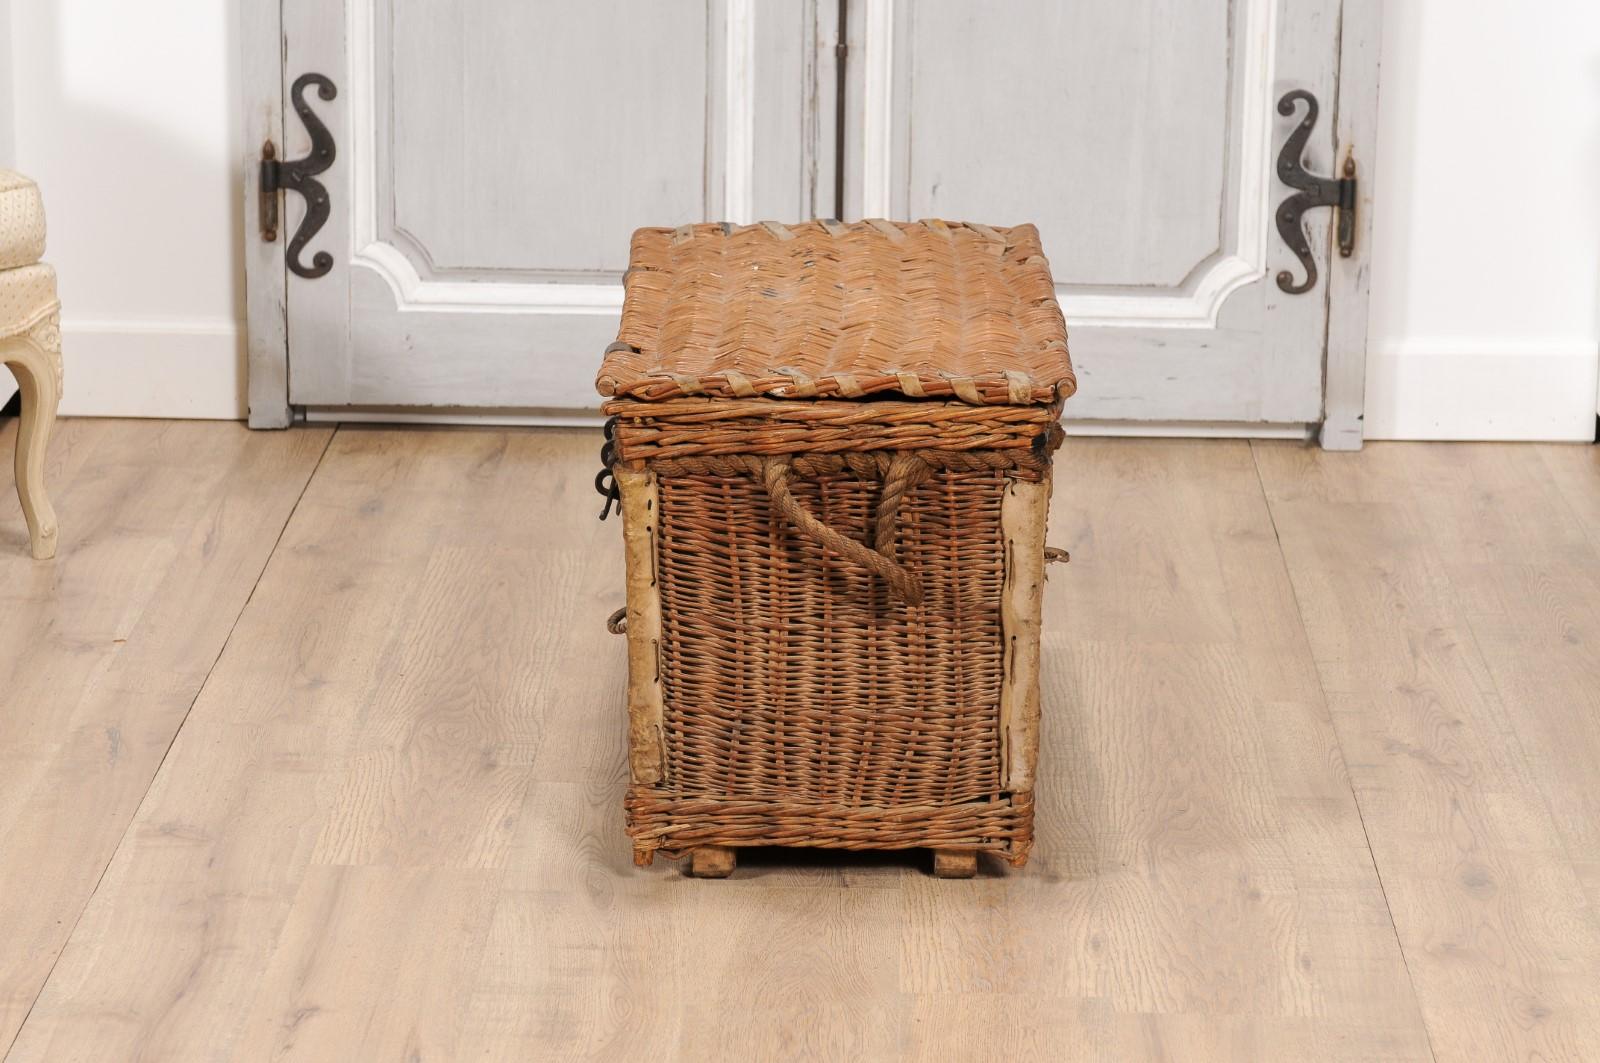 English Rustic 1930s Wicker Trunk with Iron Hardware and Lateral Handles For Sale 6